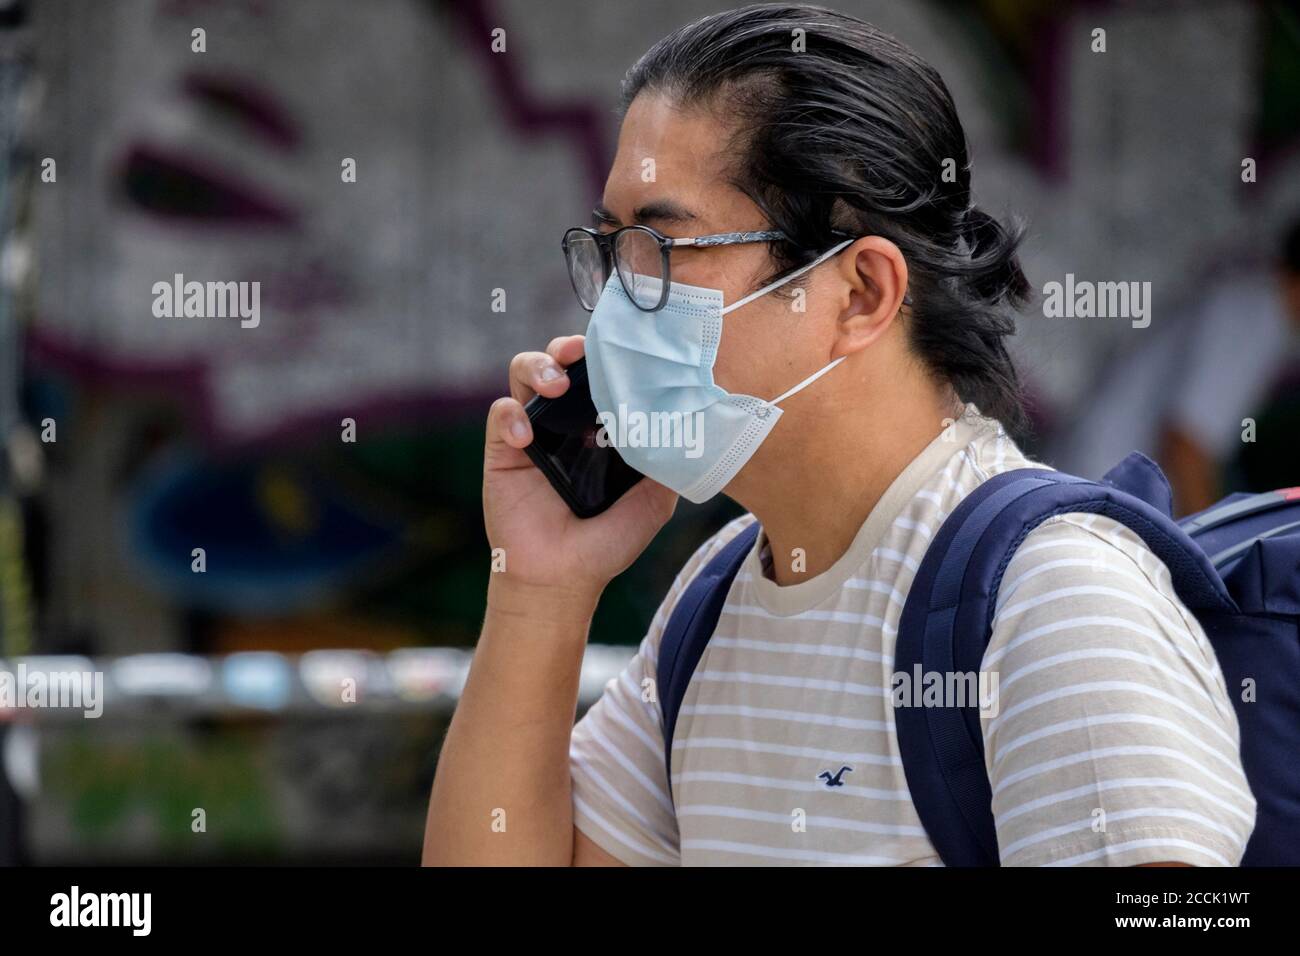 Young man speaking on mobile phone while wearing a surgical face mask in street, London. UK. Stock Photo